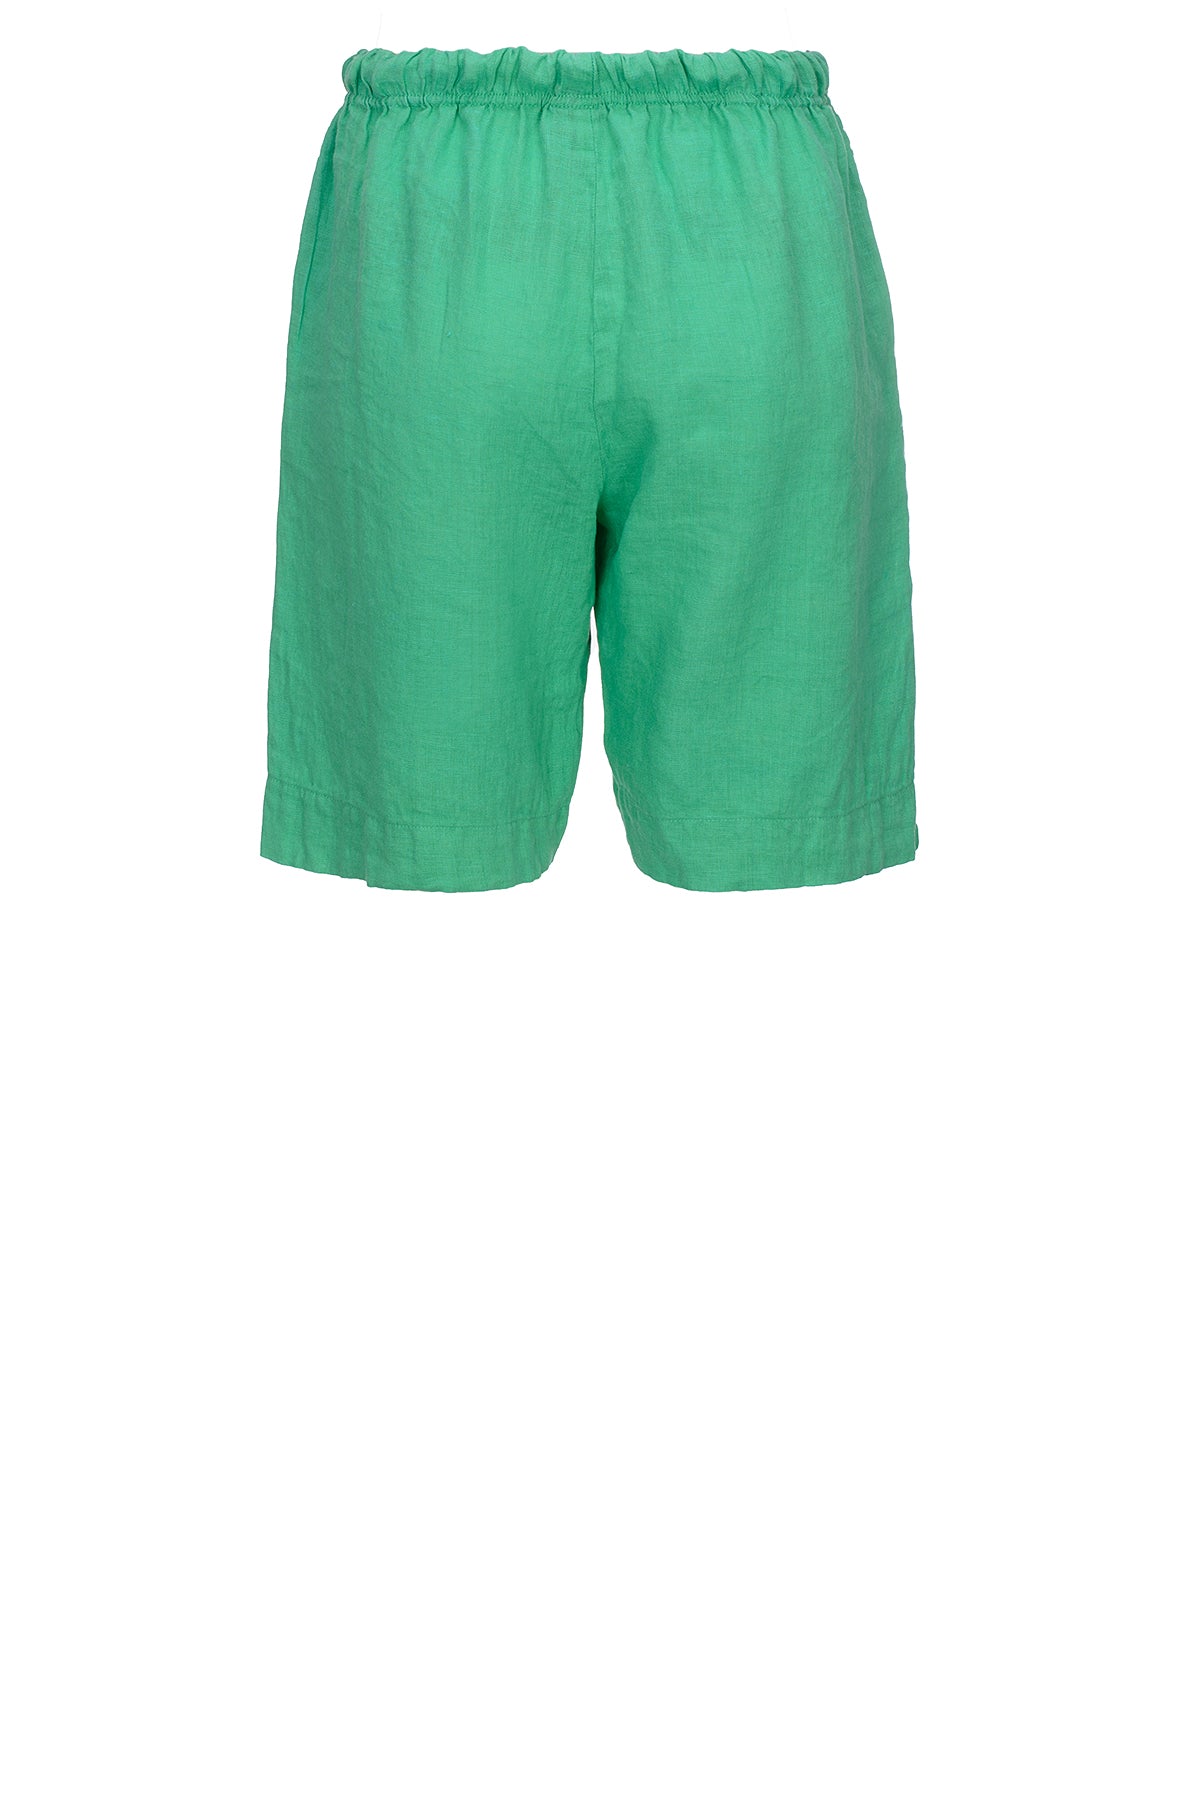 LUXZUZ // ONE TWO Lailai Shorts Shorts 618 Emerald green